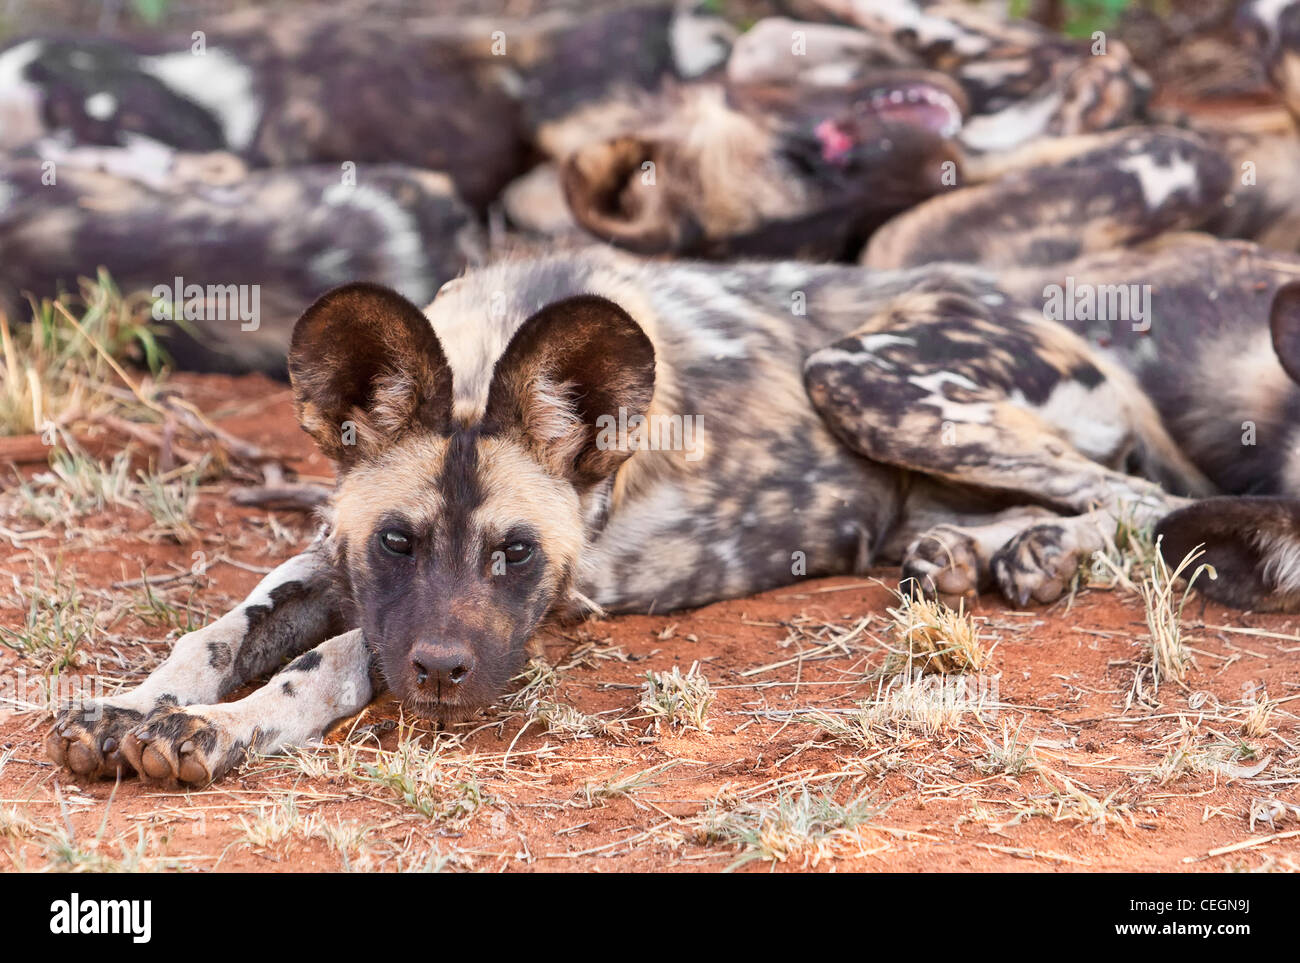 African Wild Dog (Lycaon pictus) African painted dog lying on the ground. Madikwe Game Reserve, South Africa Stock Photo